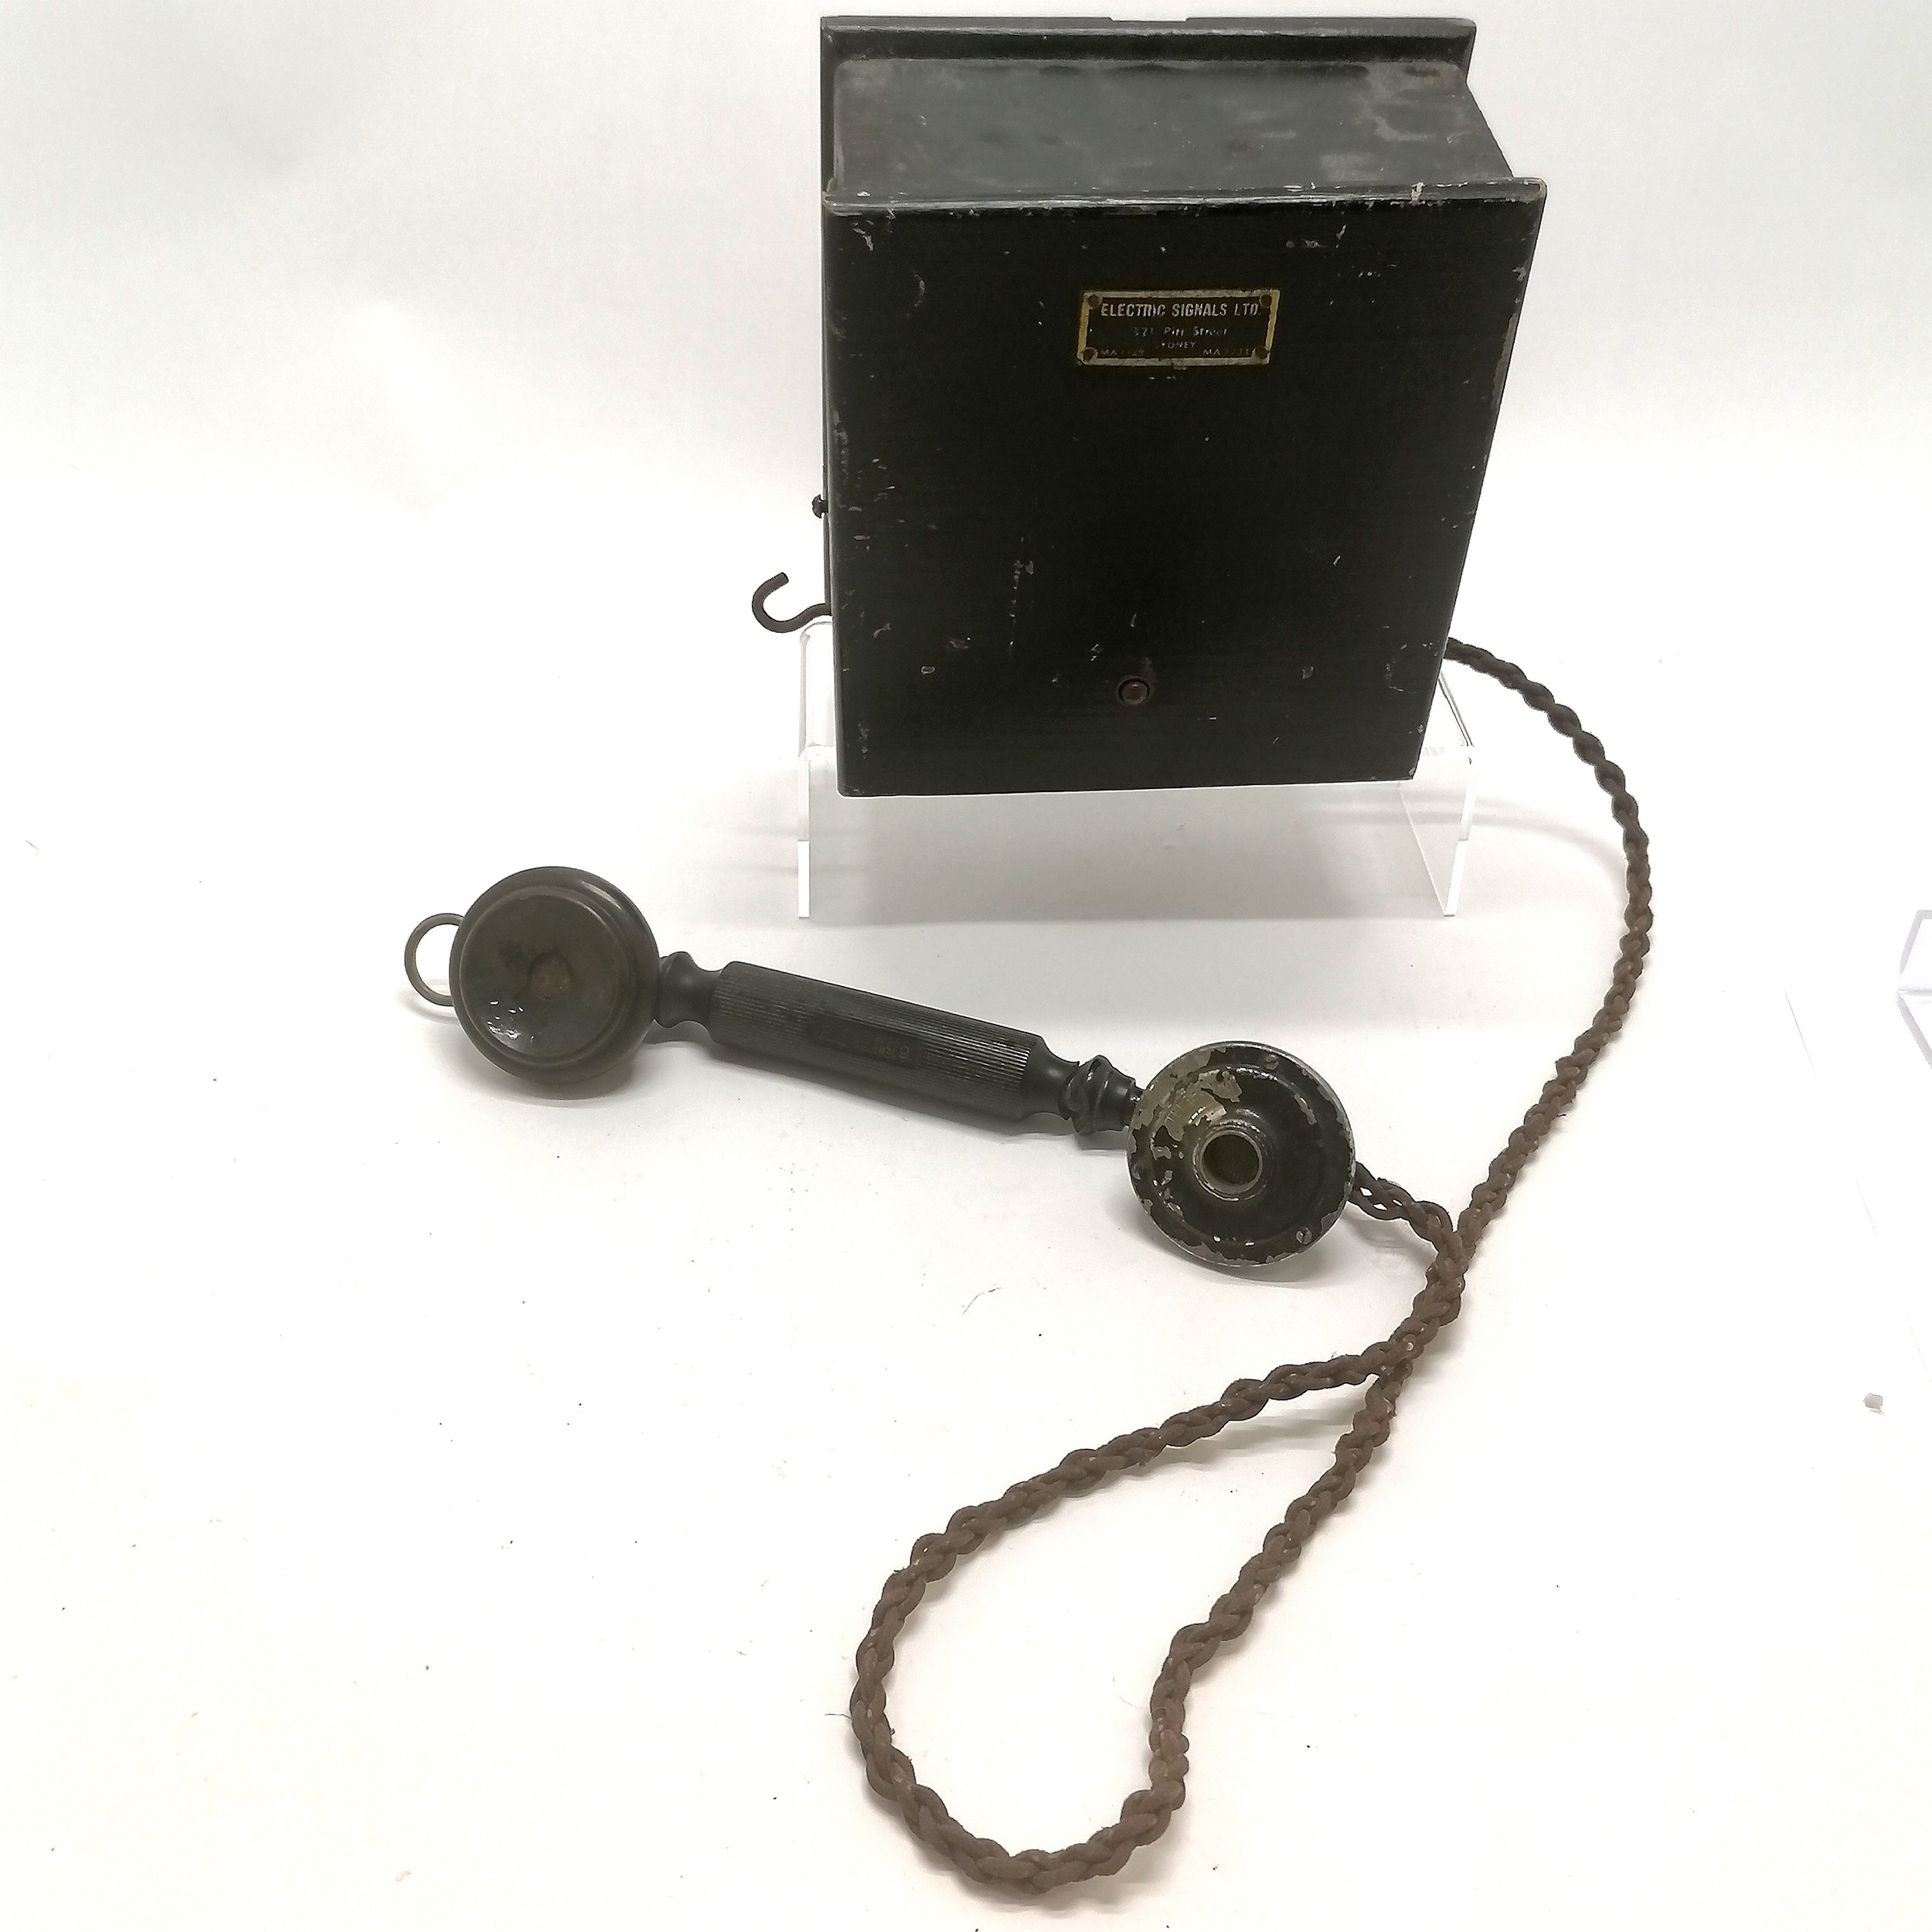 Electric Signals Ltd, Sydney railway telephone with morse code button to front - receiver length